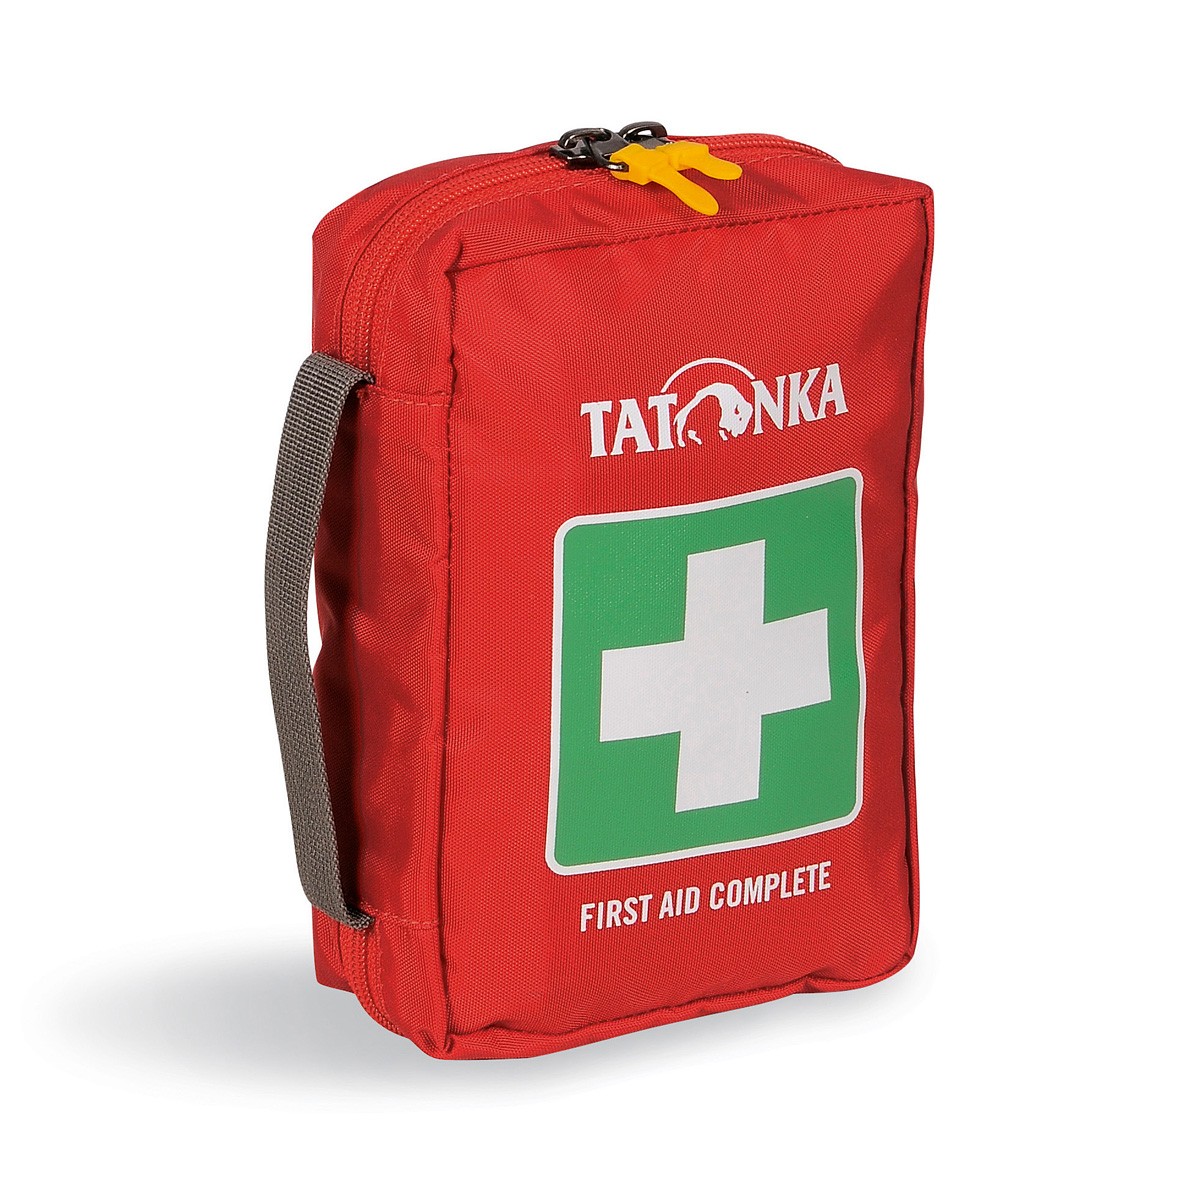 First Aid Complete, red